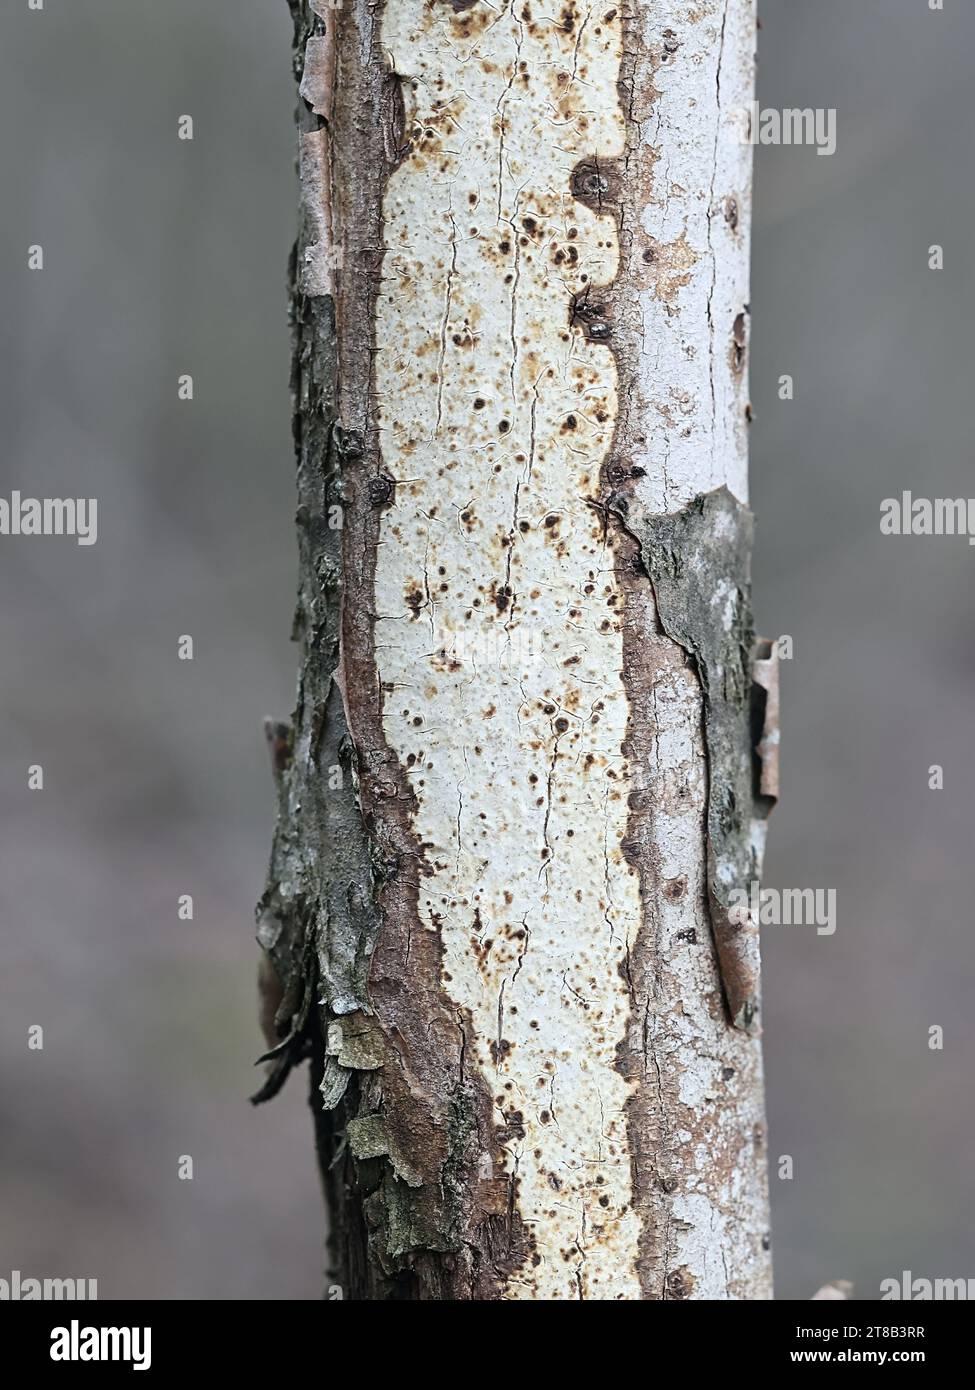 Vuilleminia coryli, a crust fungus growing on hazel in Finland, no common English name Stock Photo